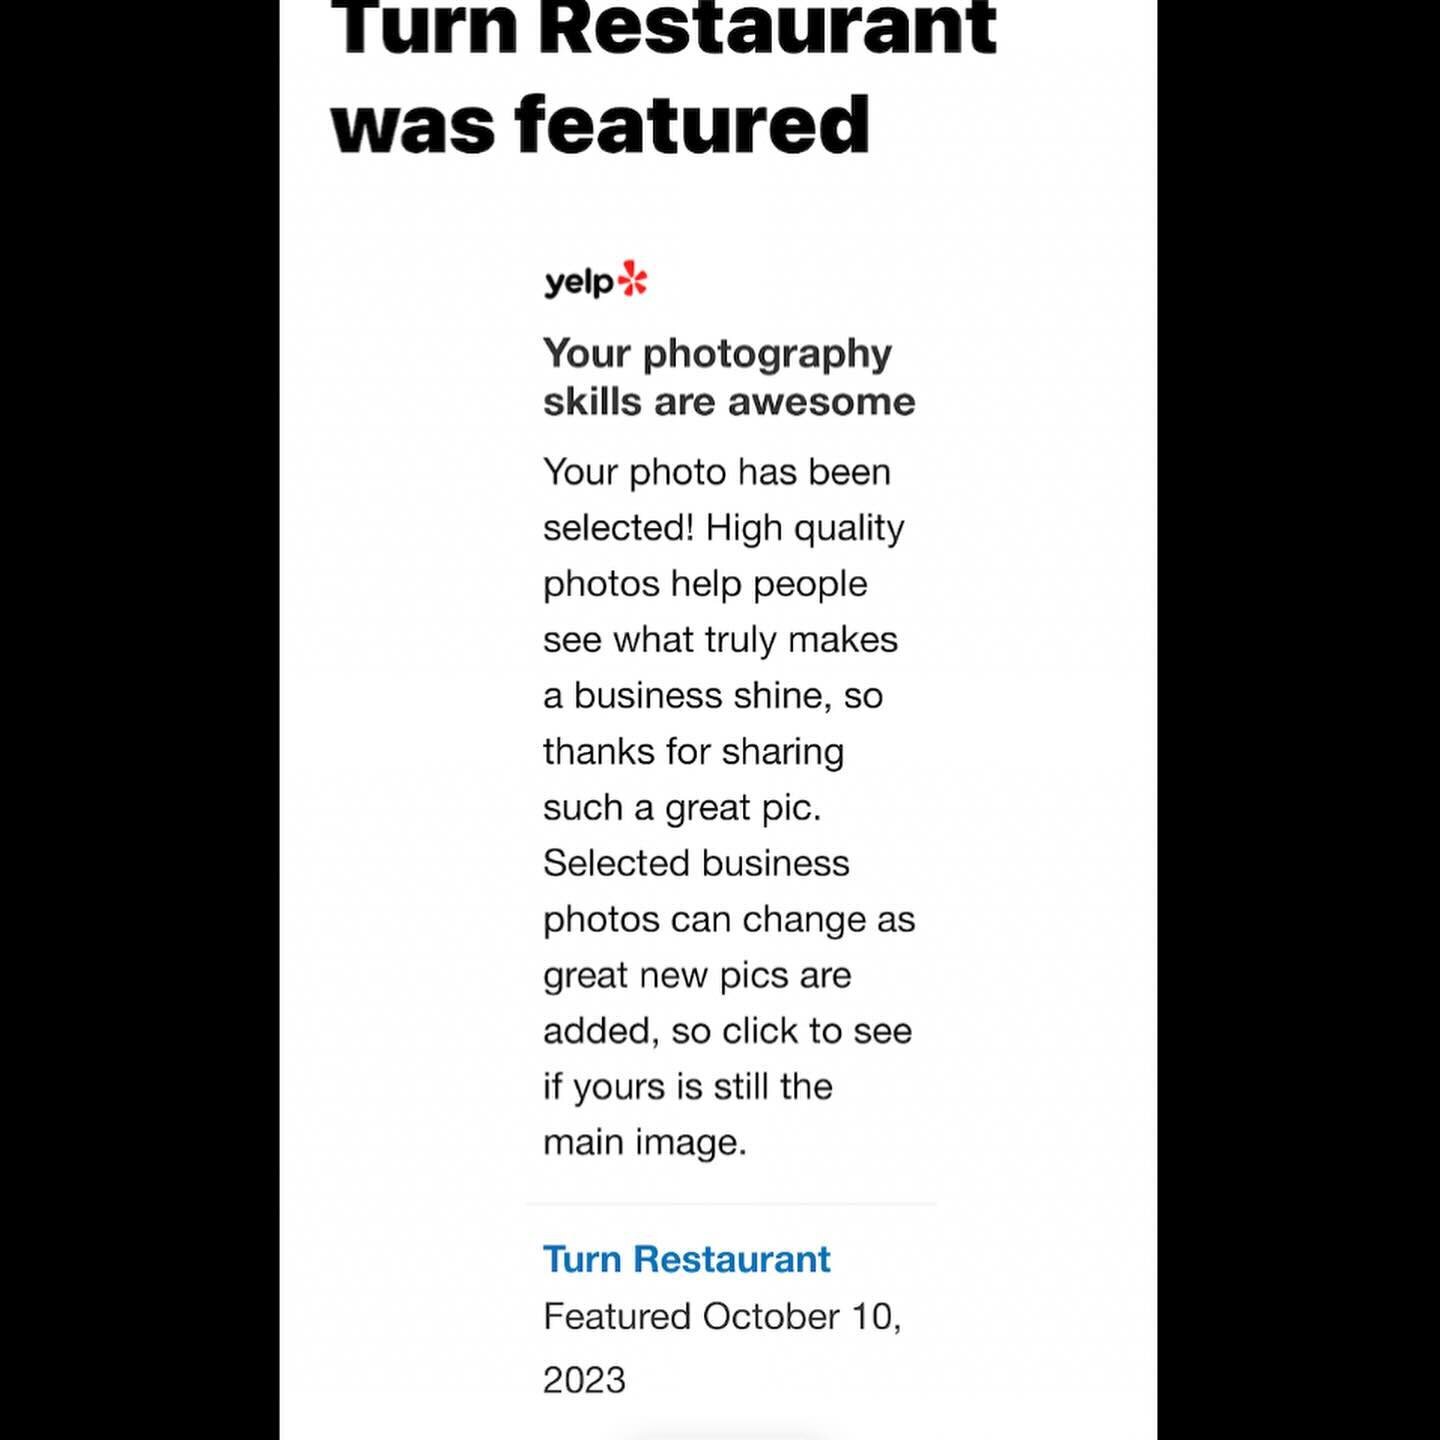 Ayeeee! One of my photos from my visit to @turnstl was a chosen feature on yelp for! YAY! Thanks @yelp 
.
#yelp #yelpeats #yelpstl #stlfood #stlfoodscene #stlfoodie #foodreviews #foodcontent #foodinfluencer #foodanddrink #travelandfoodblogger